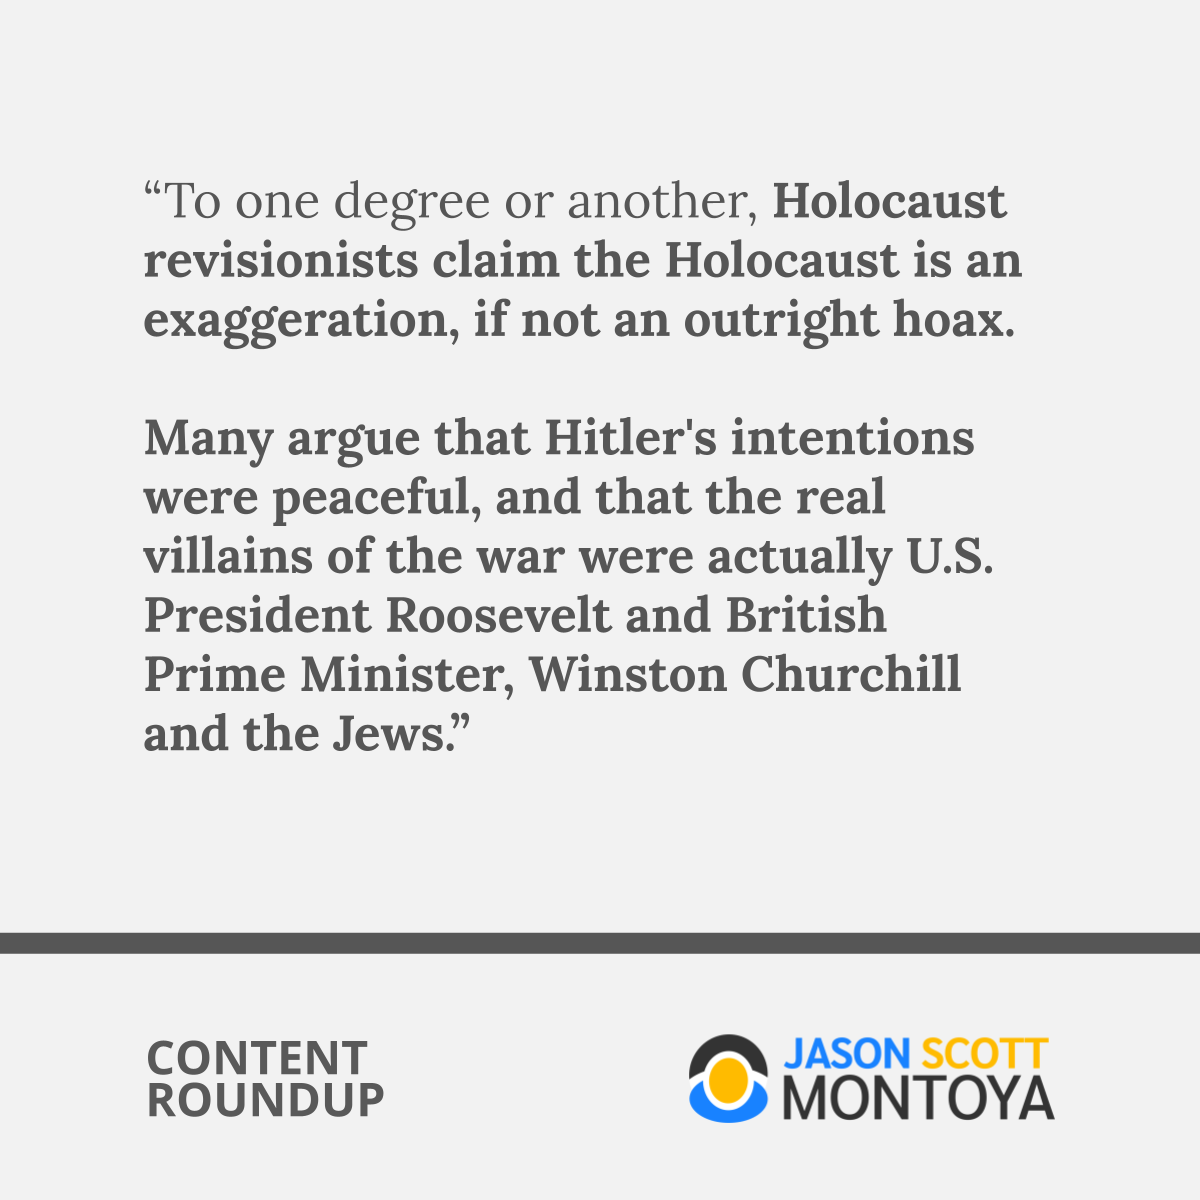 “To one degree or another, Holocaust revisionists claim the Holocaust is an exaggeration, if not an outright hoax.  Many argue that Hitler's intentions were peaceful, and that the real villains of the war were actually U.S. President Roosevelt and British Prime Minister, Winston Churchill and the Jews.”